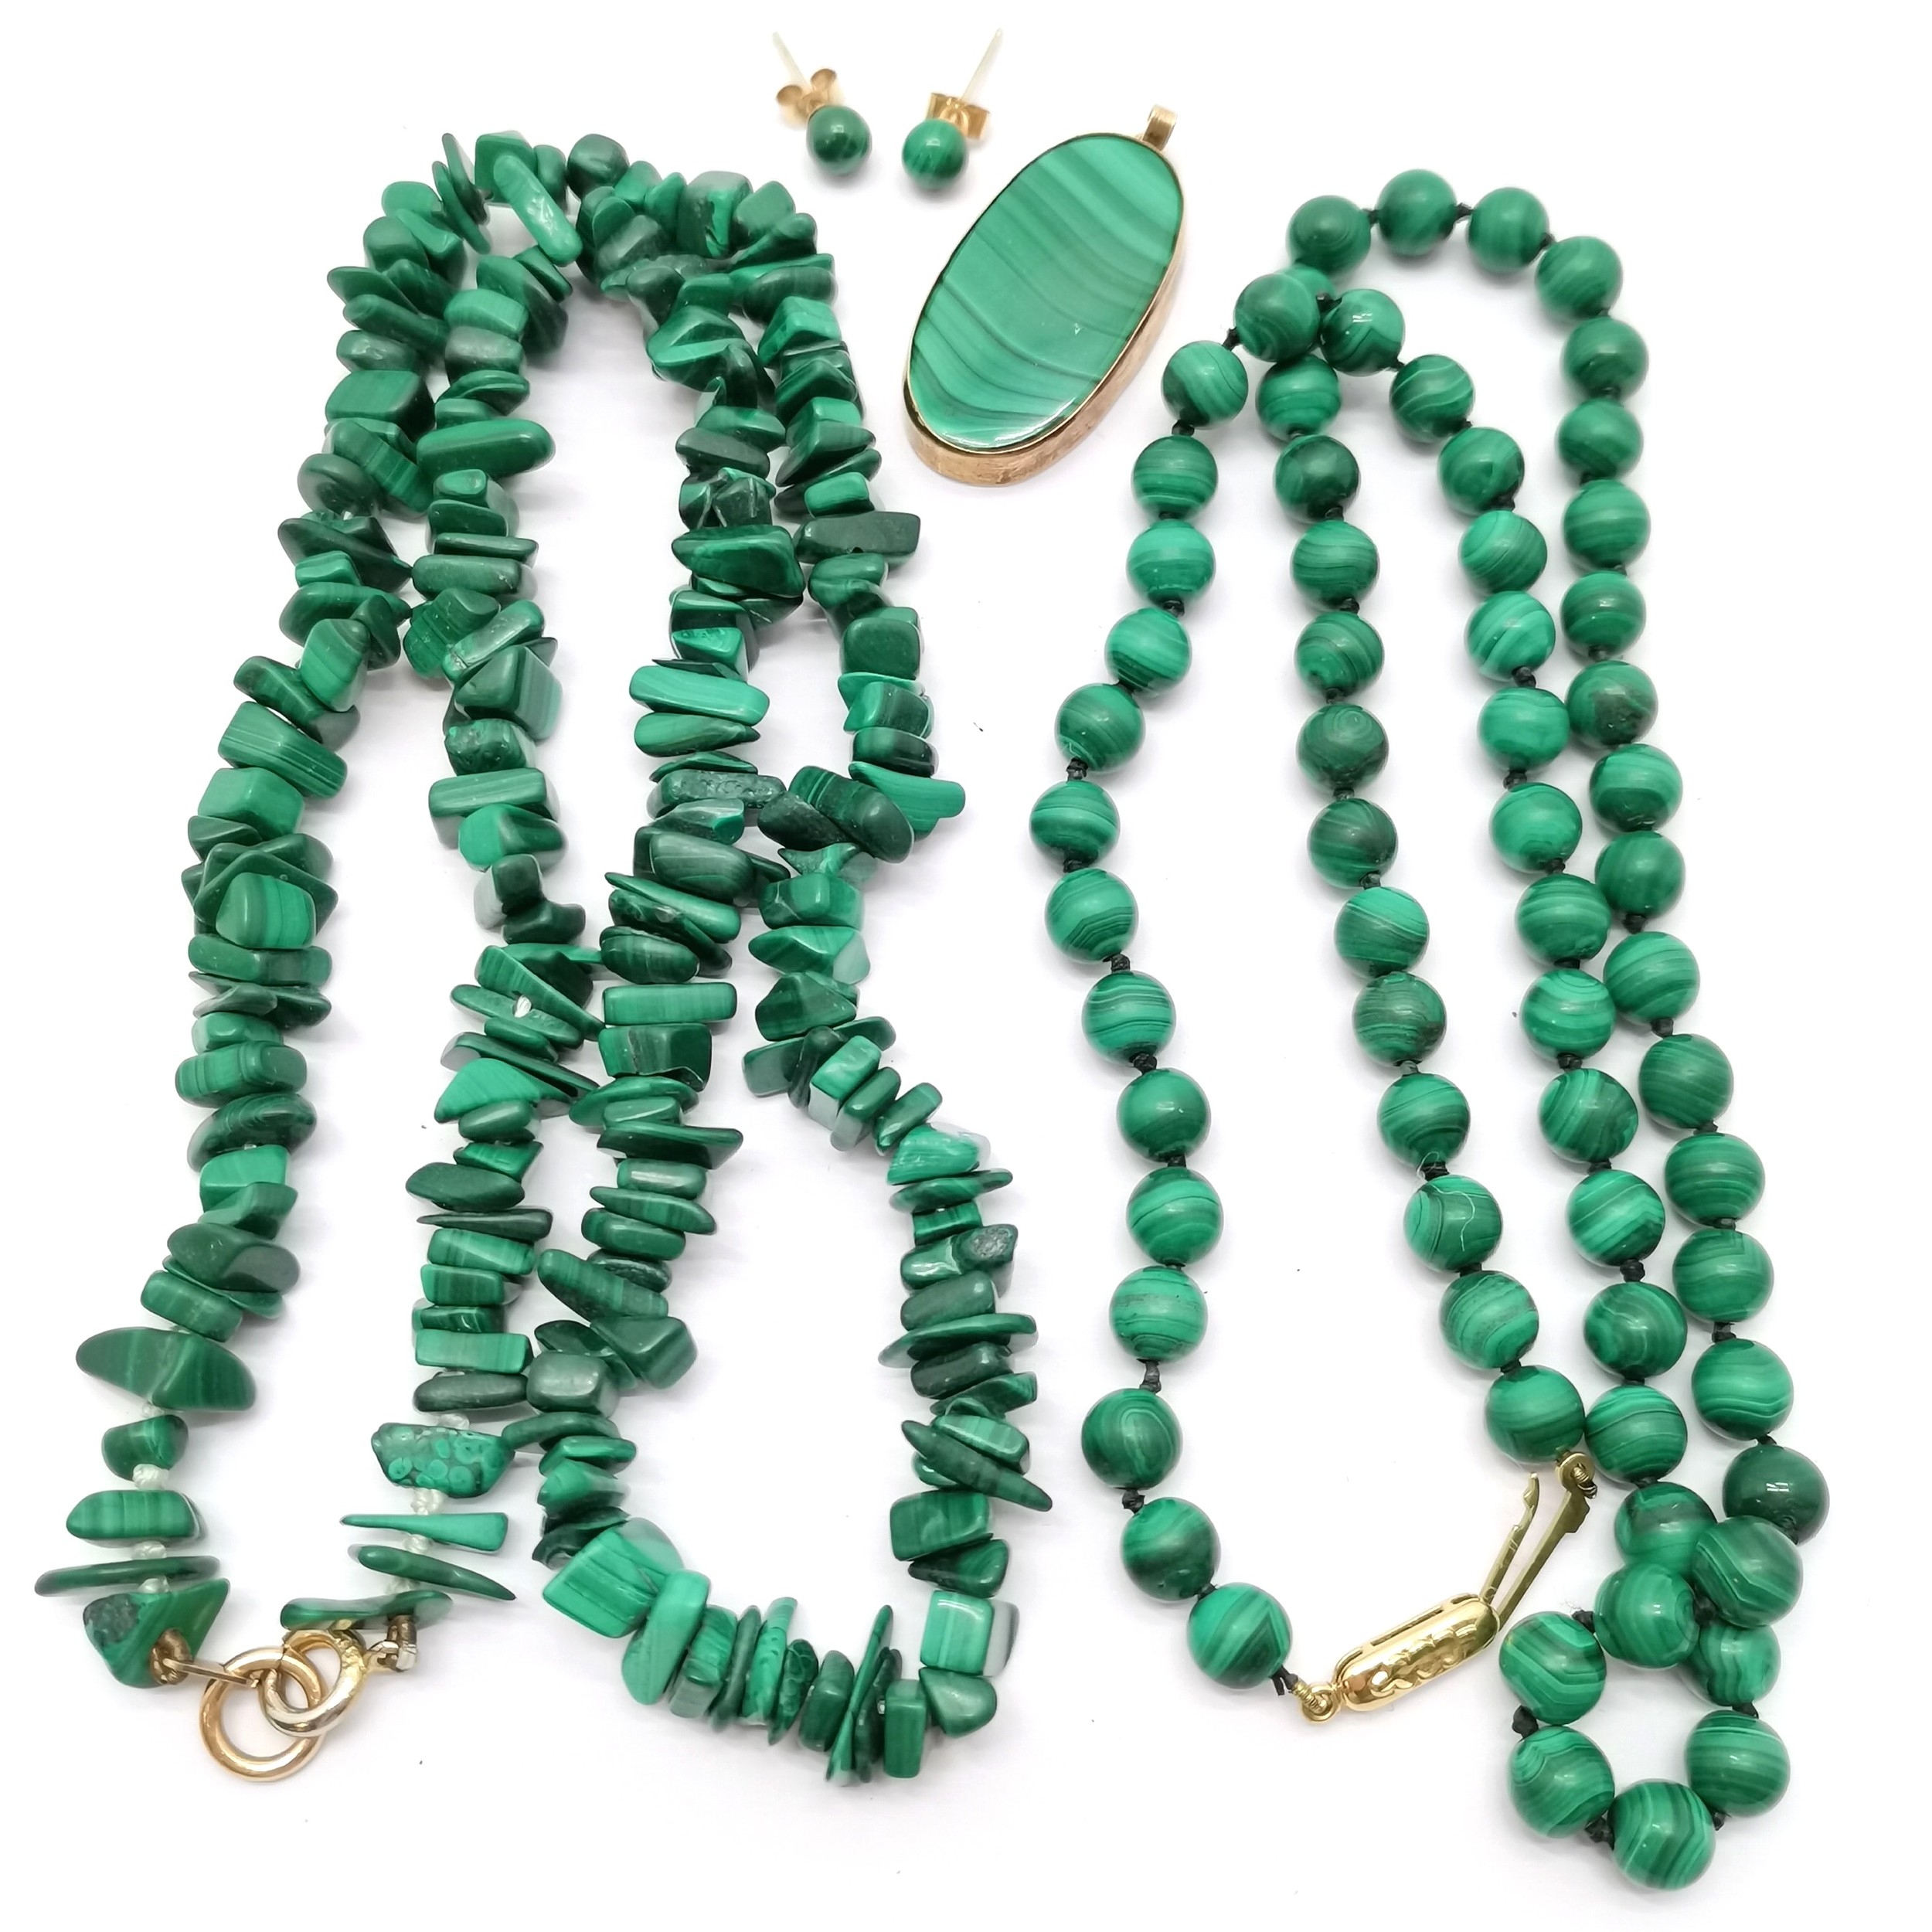 9ct gold mounted malachite bead necklace (44cm), pendant & earrings t/w raw malachite necklace